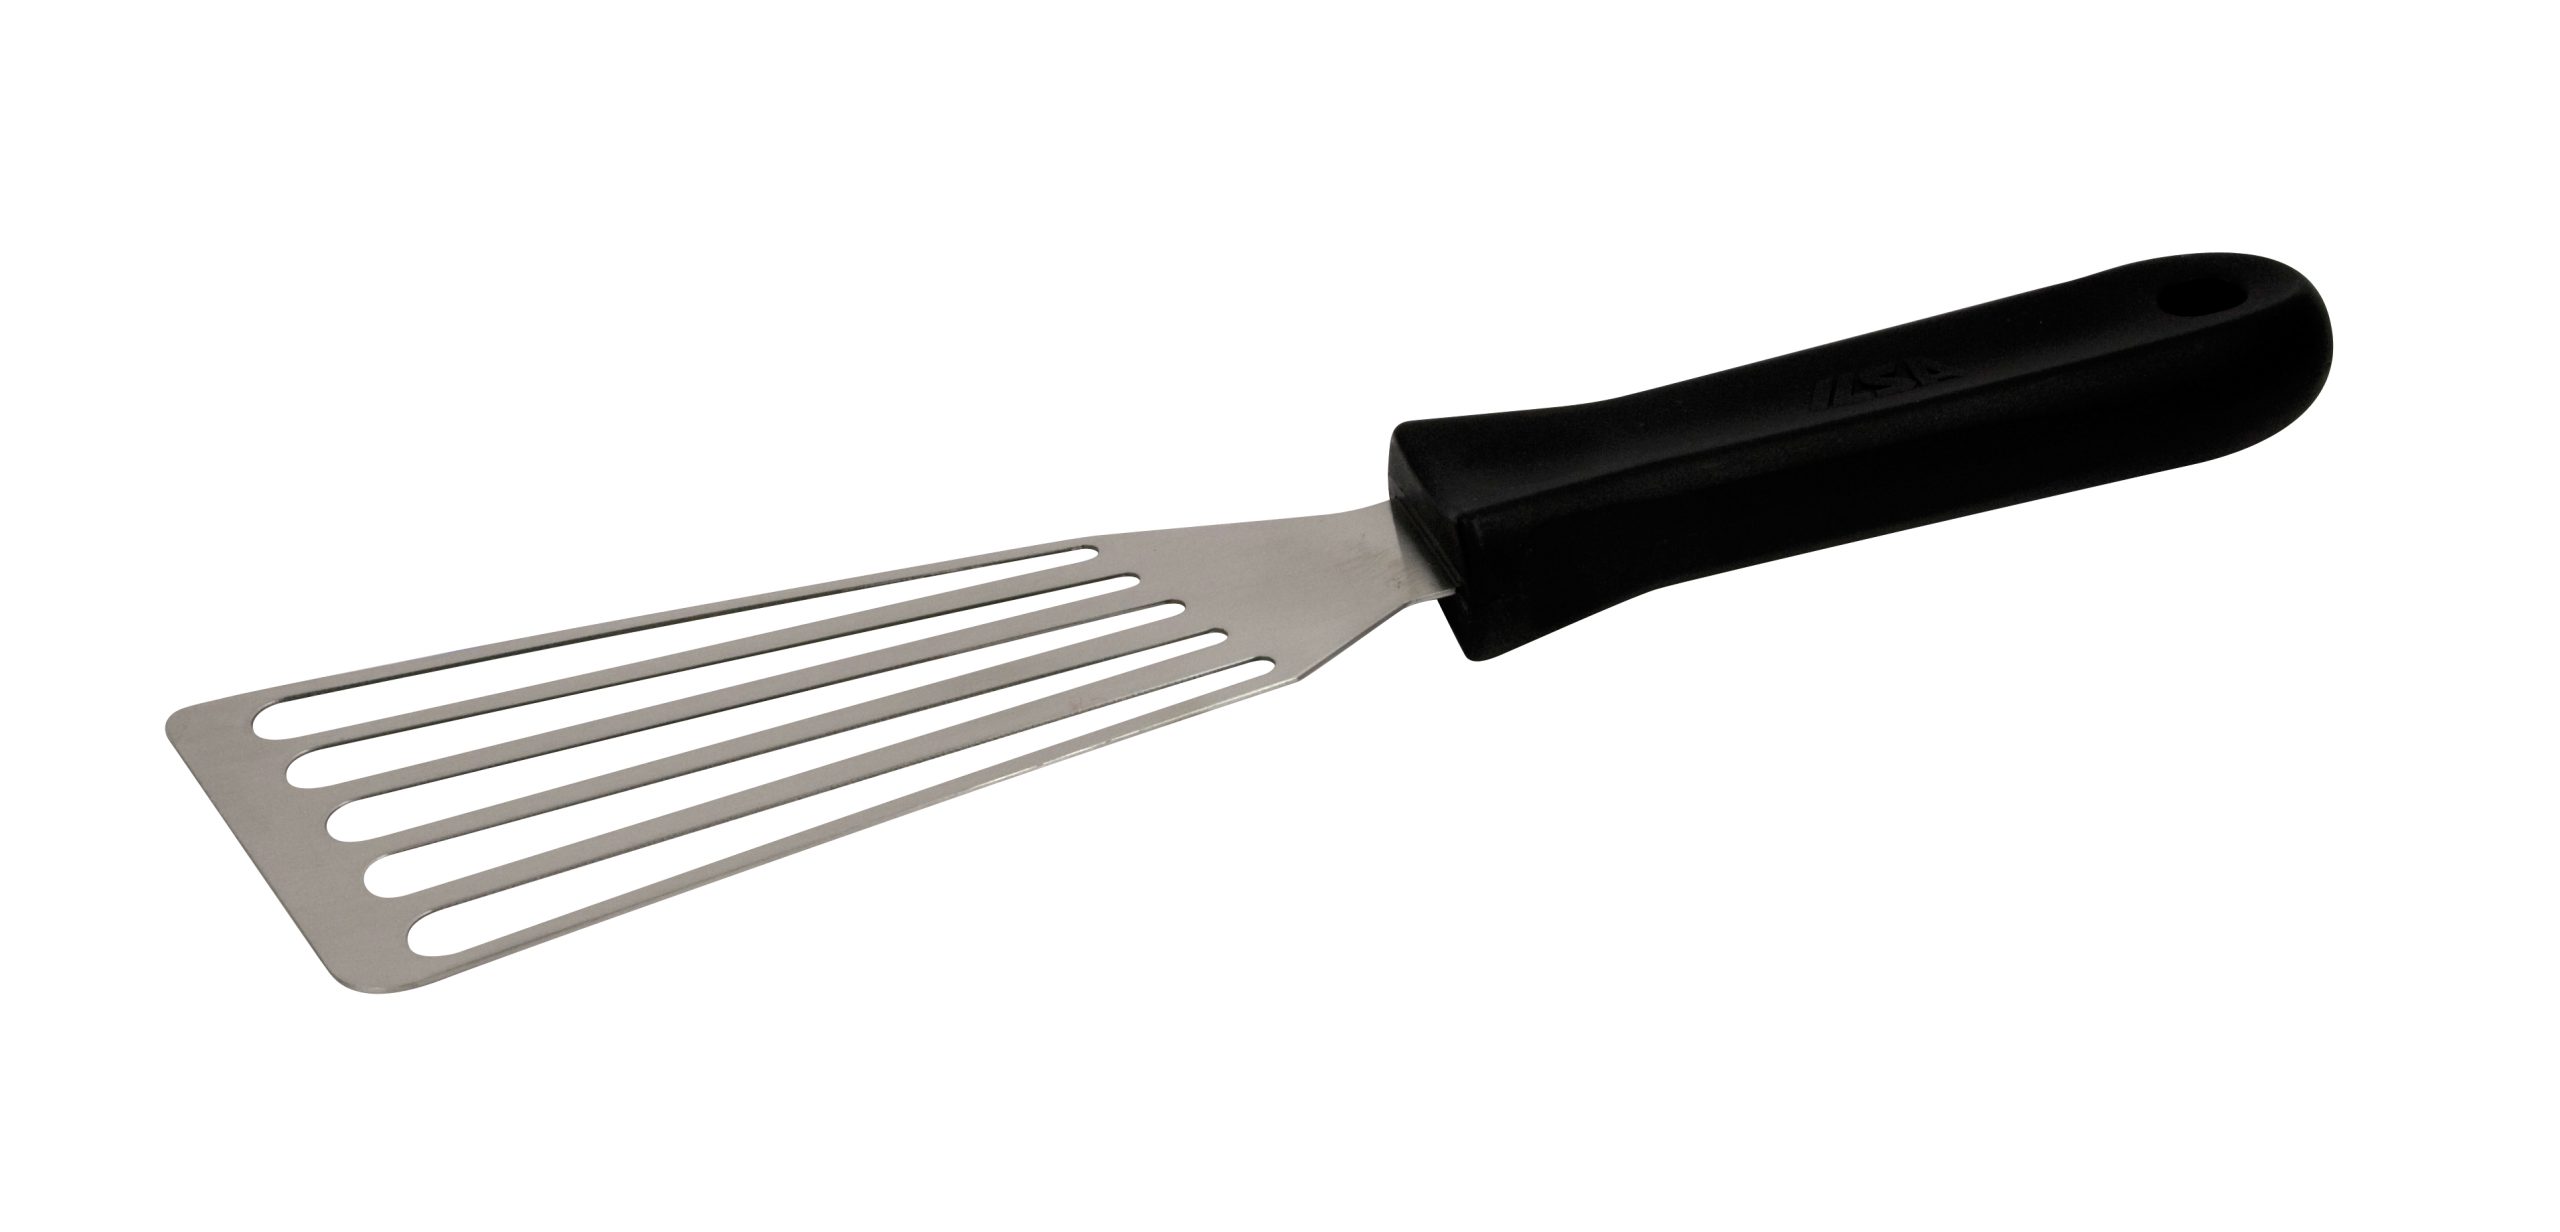 Frying spatula - Stainless steel 16cm